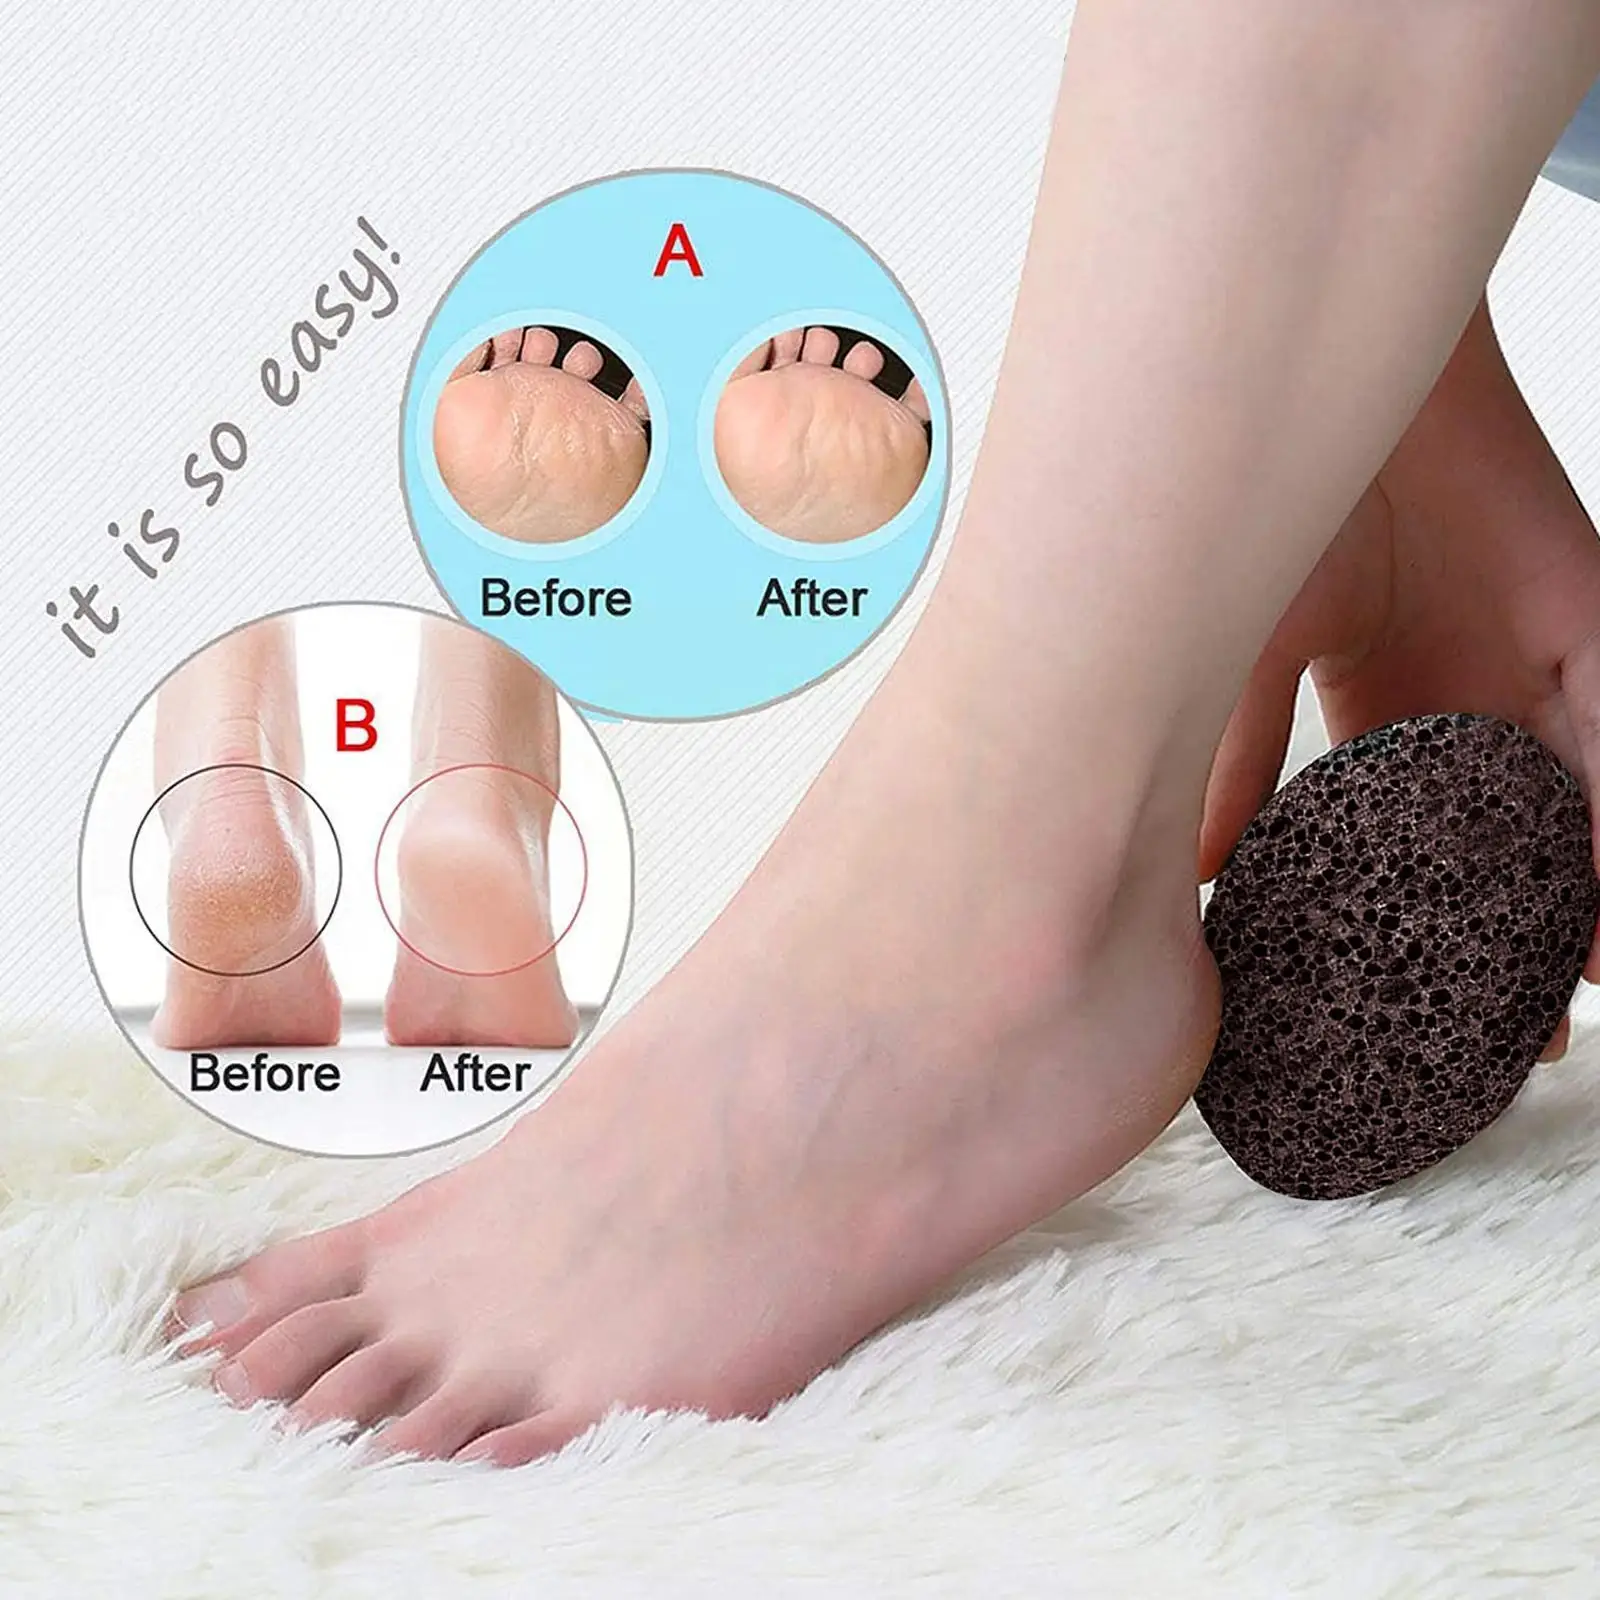 

Natural Grinding Stone Pumice Stone For Feet Exfoliator Foot Scrubber Callus Remover Dead Skin Grinding Callus Foot Care To E7N4